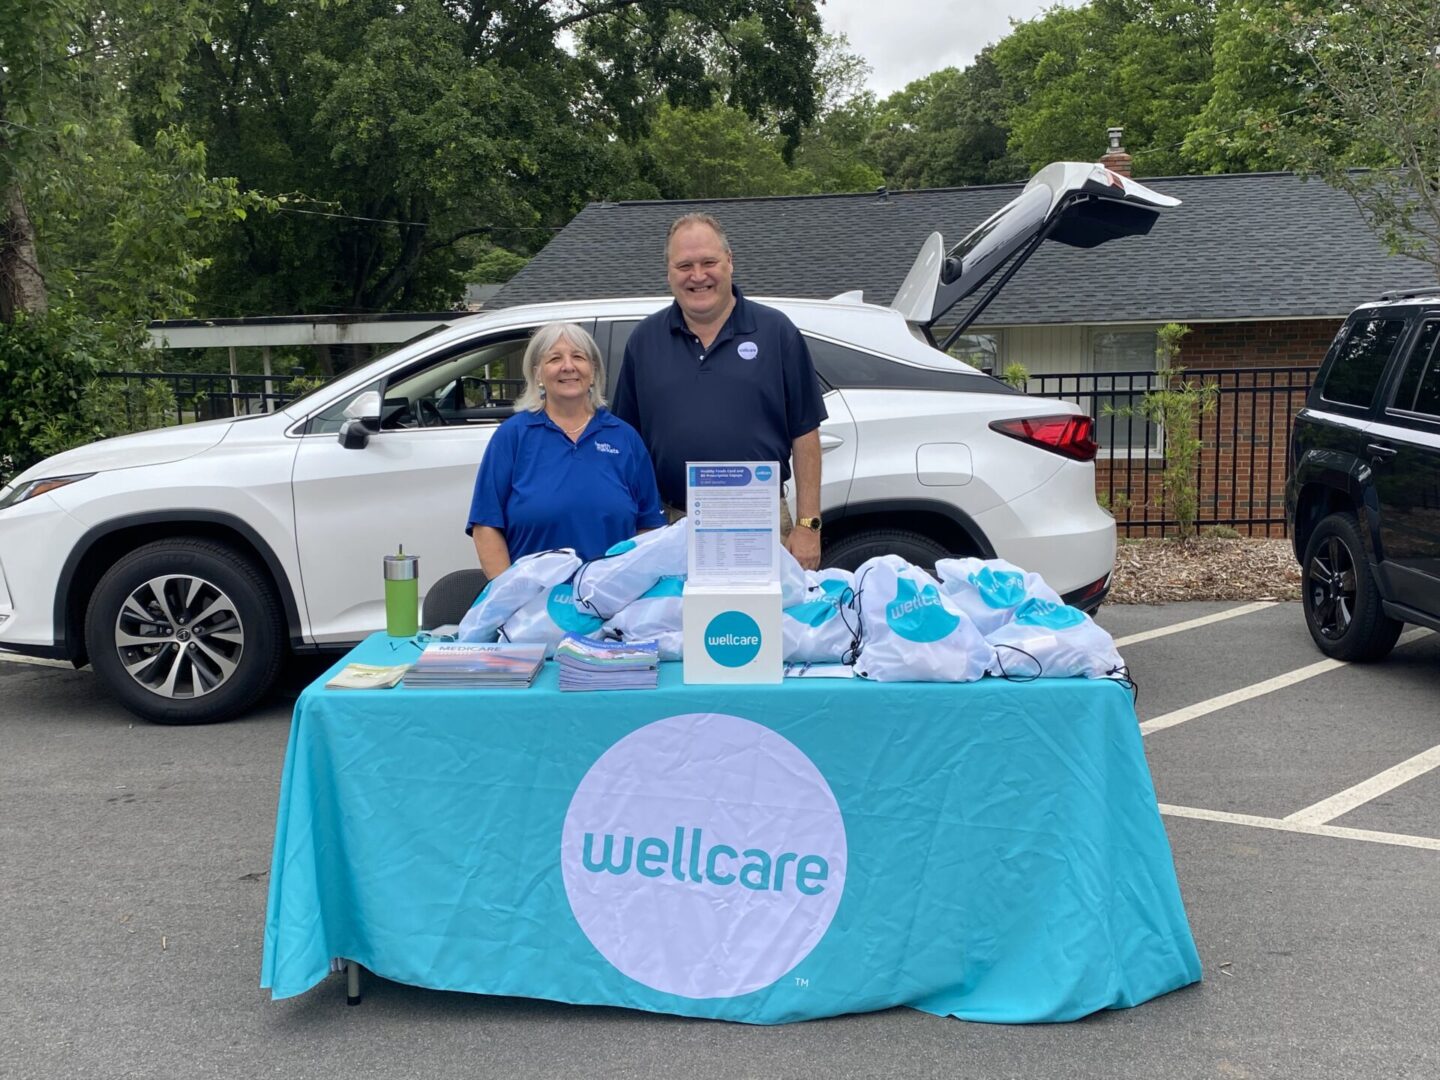 Wellcare offers hygiene kits at the 2023 Spring Labor of Love